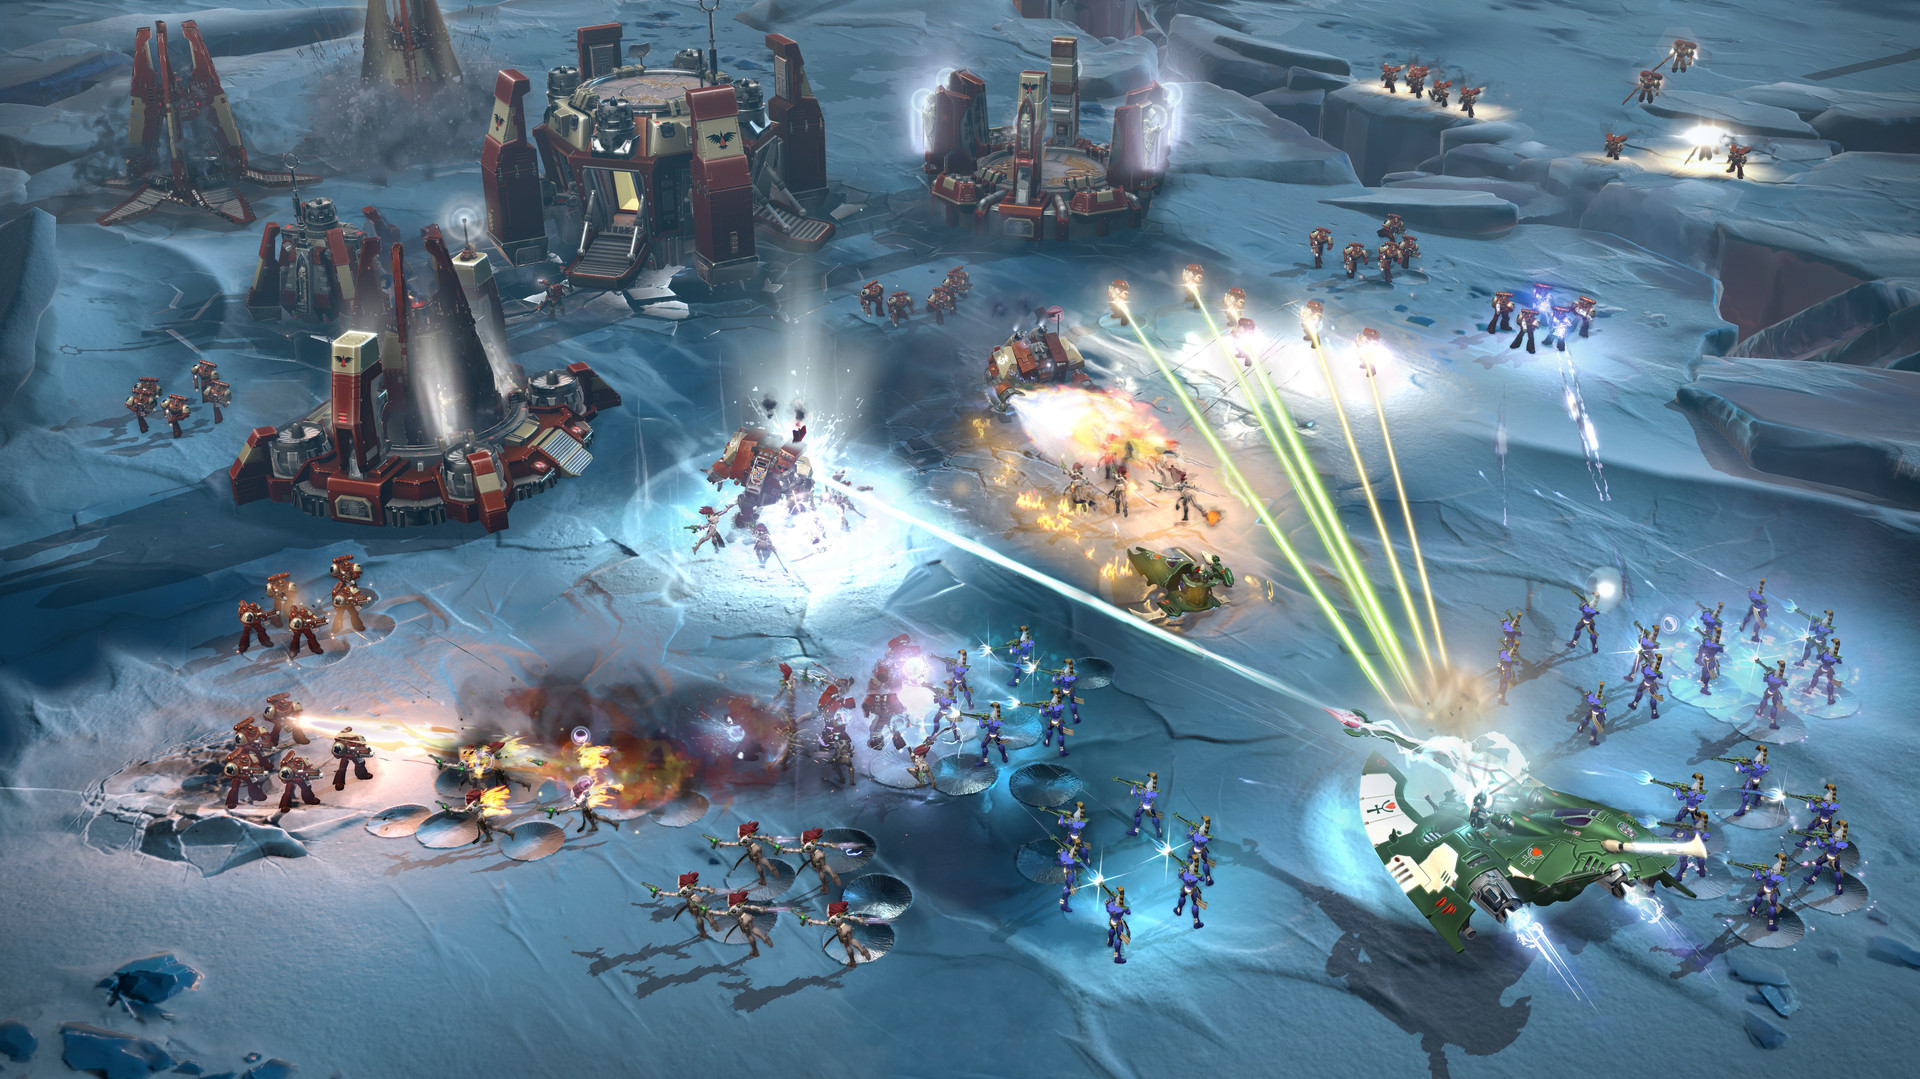 Dawn of war 3, a game which requires strong AI programming.